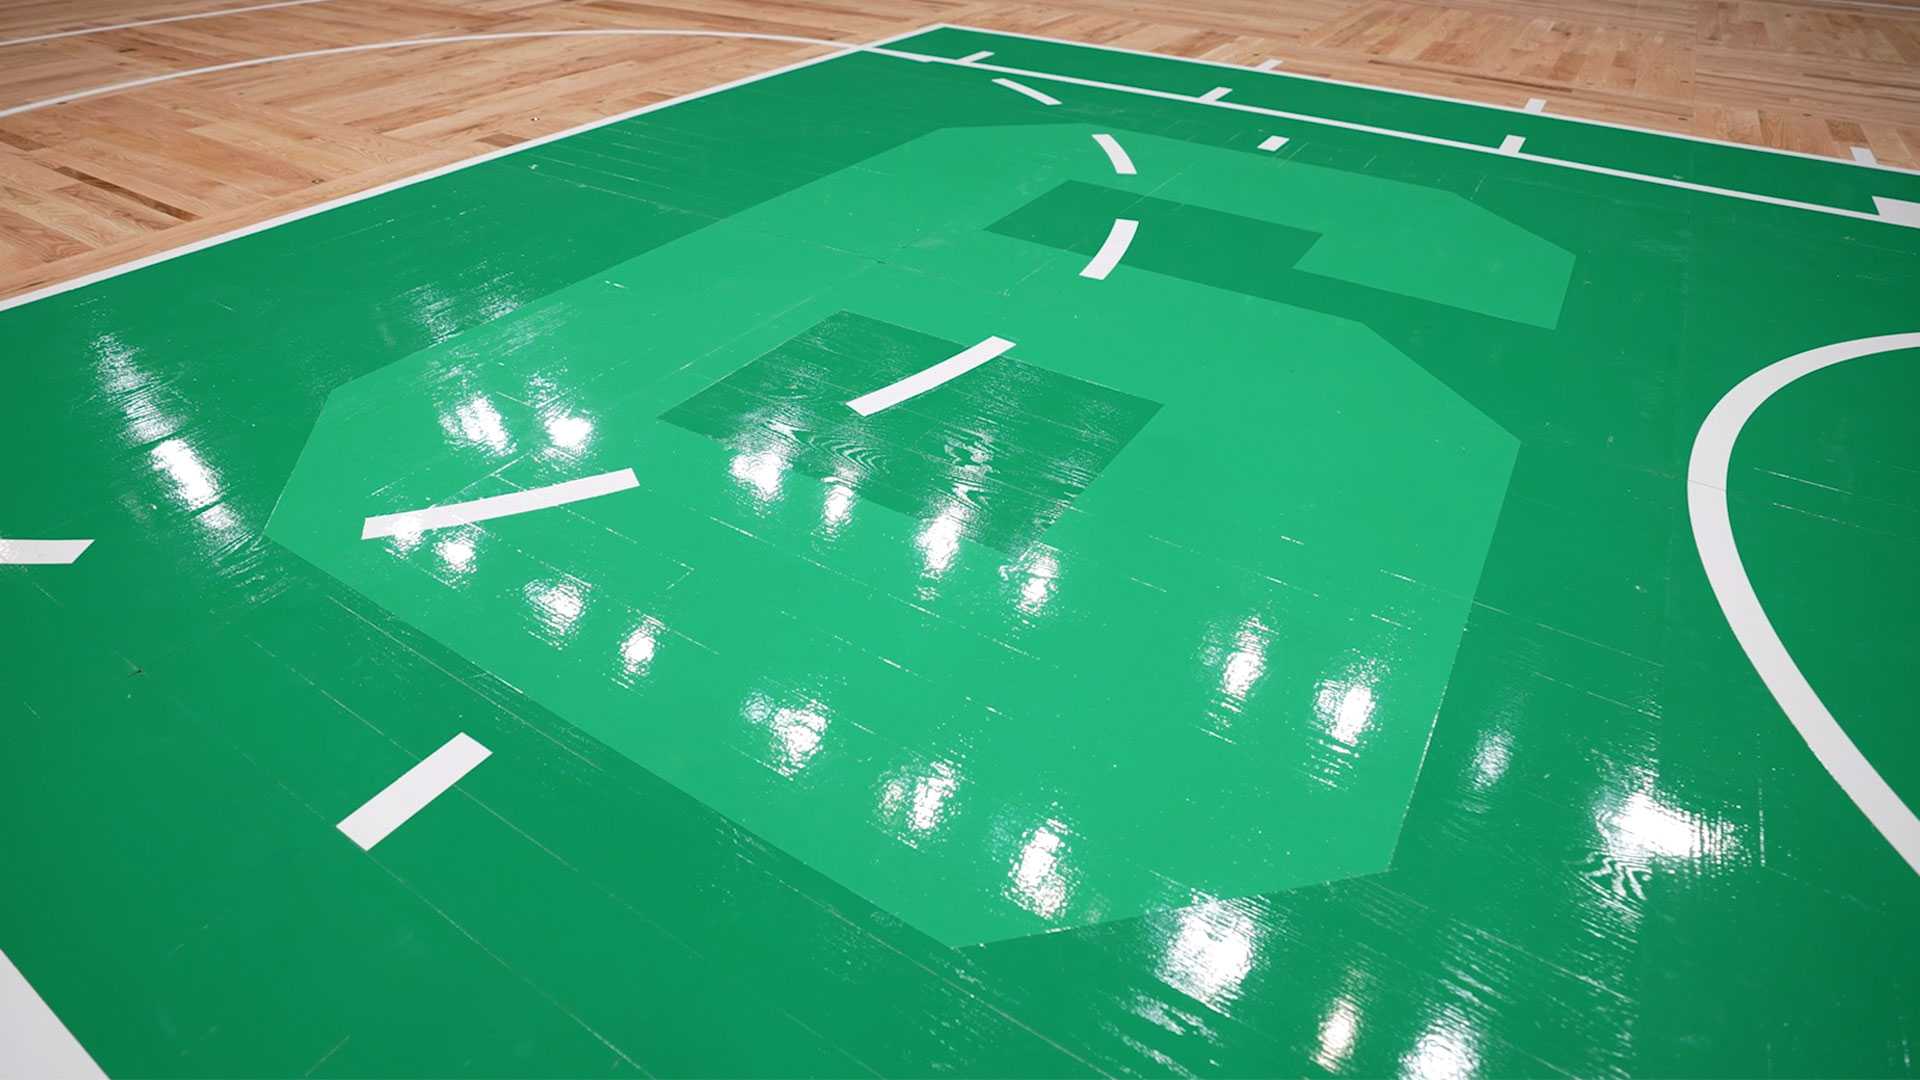 Celtics add No. 6 in parquet paint to honor Bill Russell